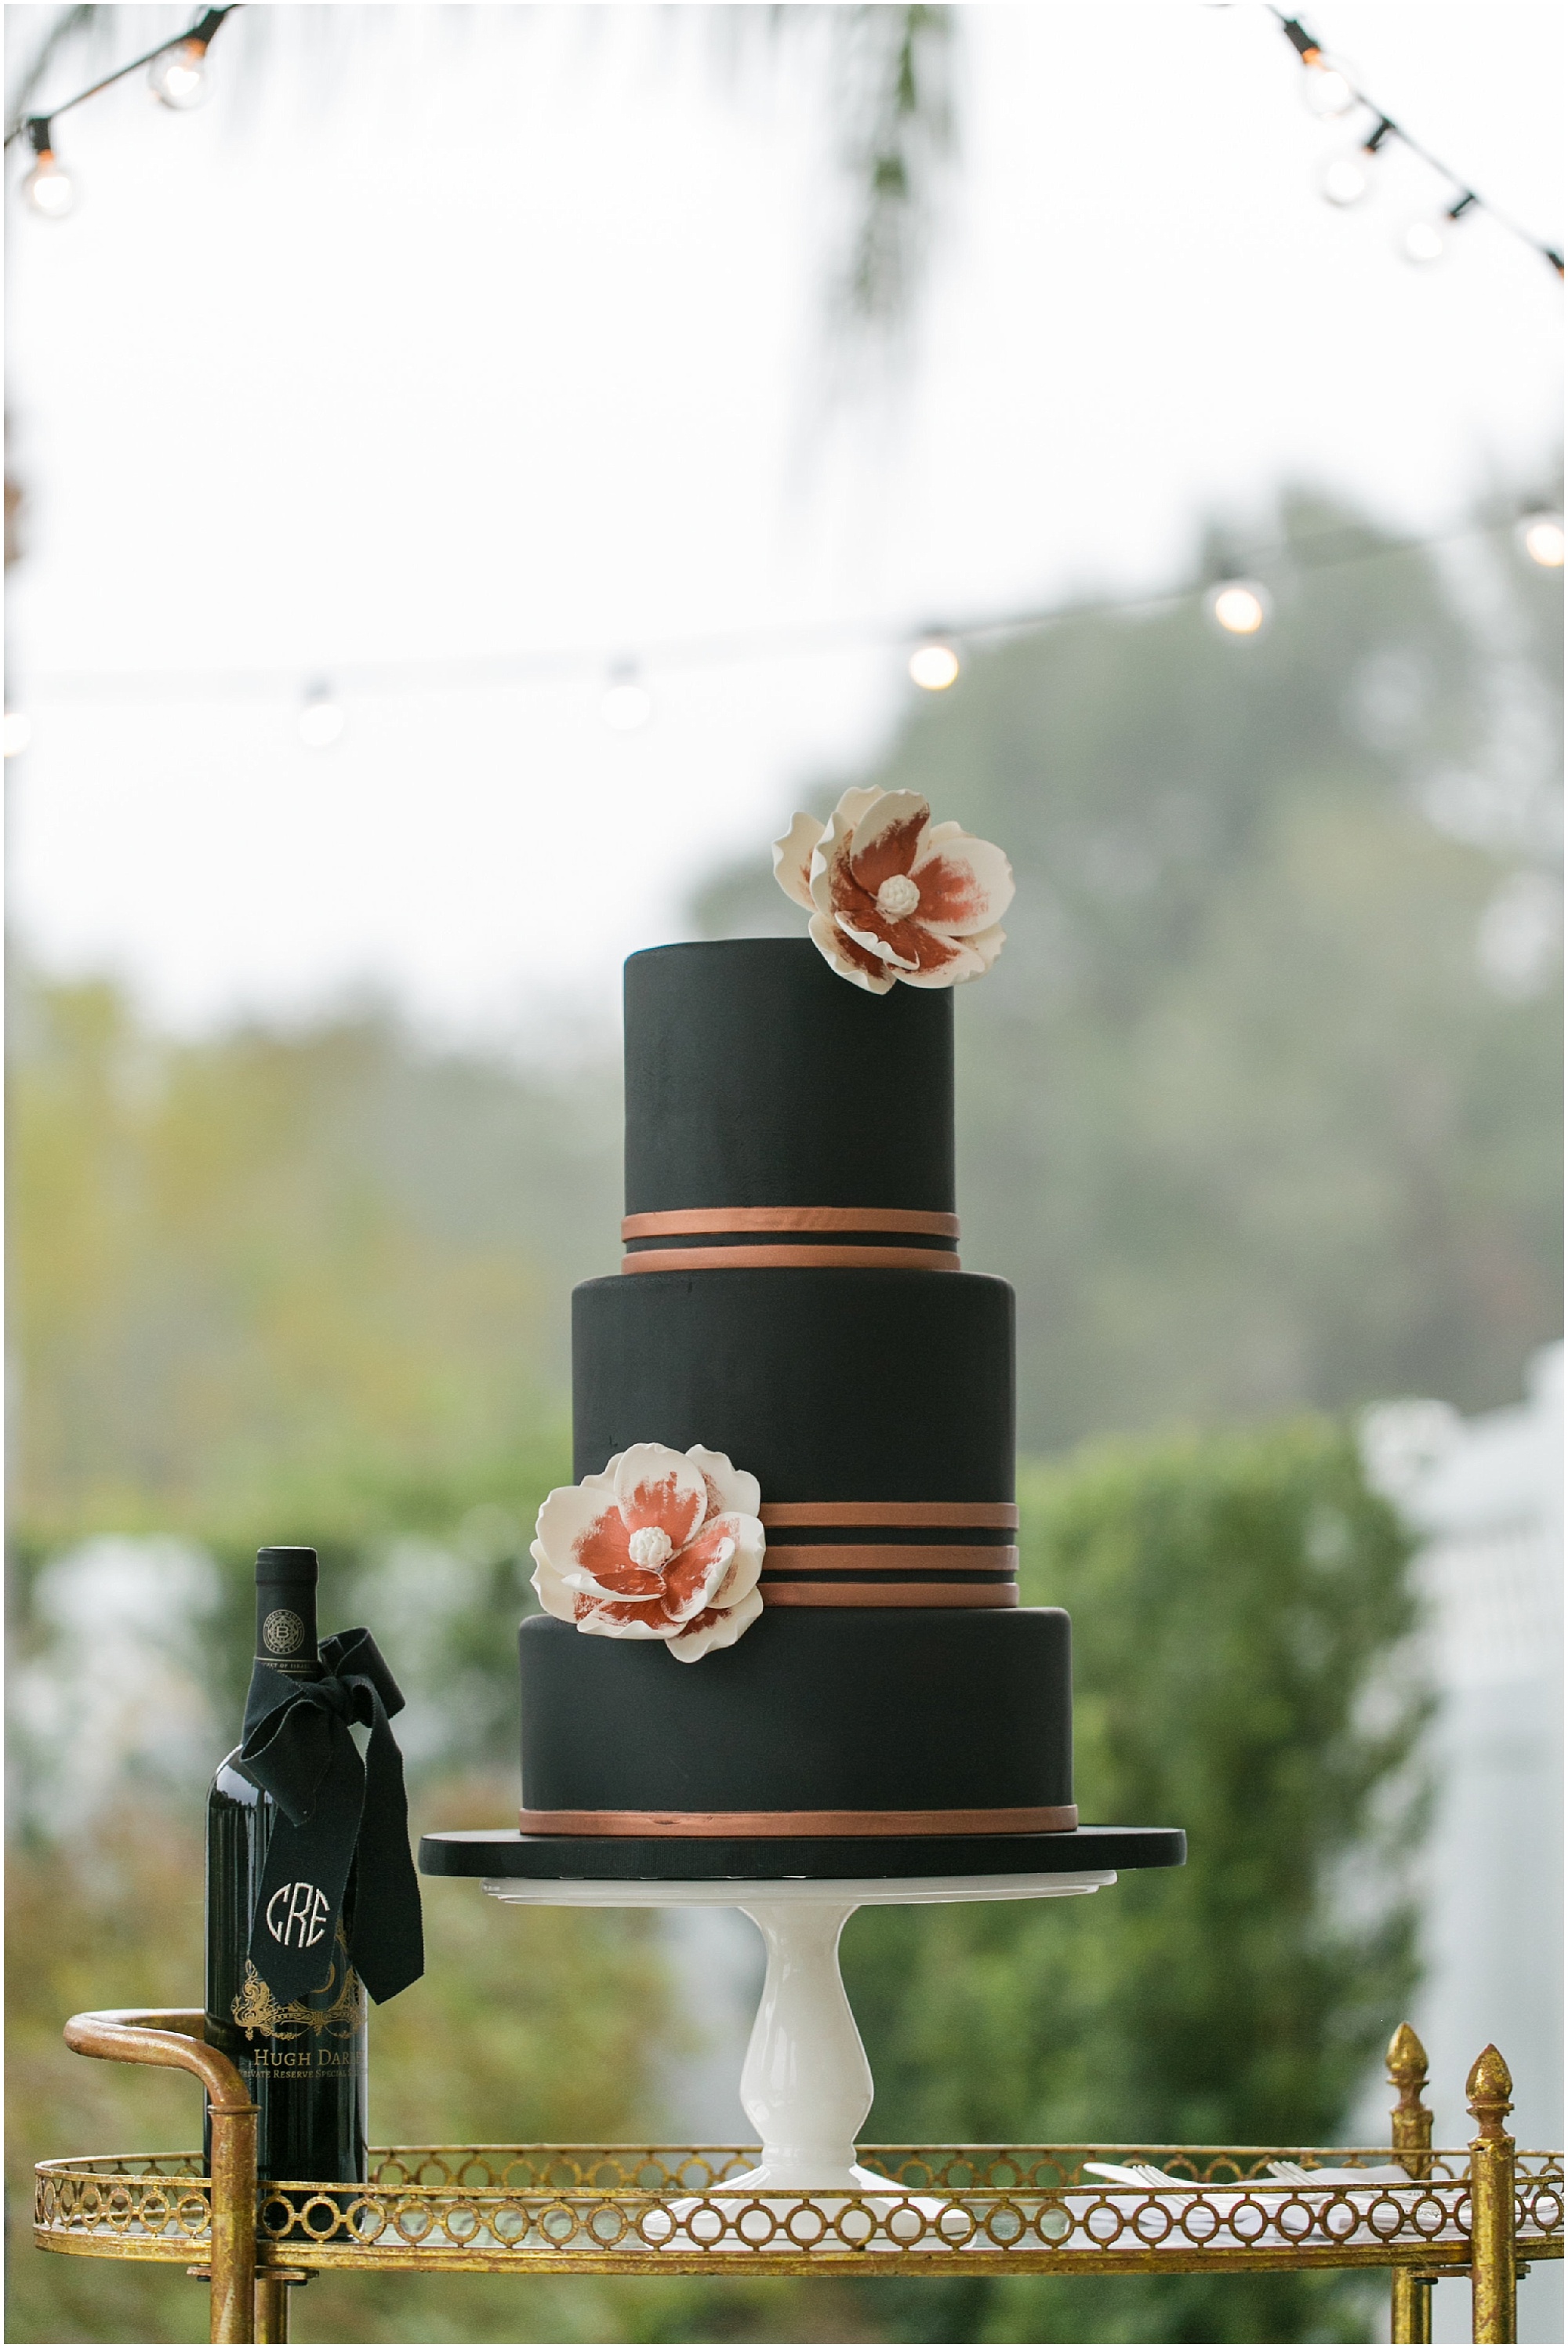 Wedding cake and wine bottle on the terrace with stringed lights in the background.